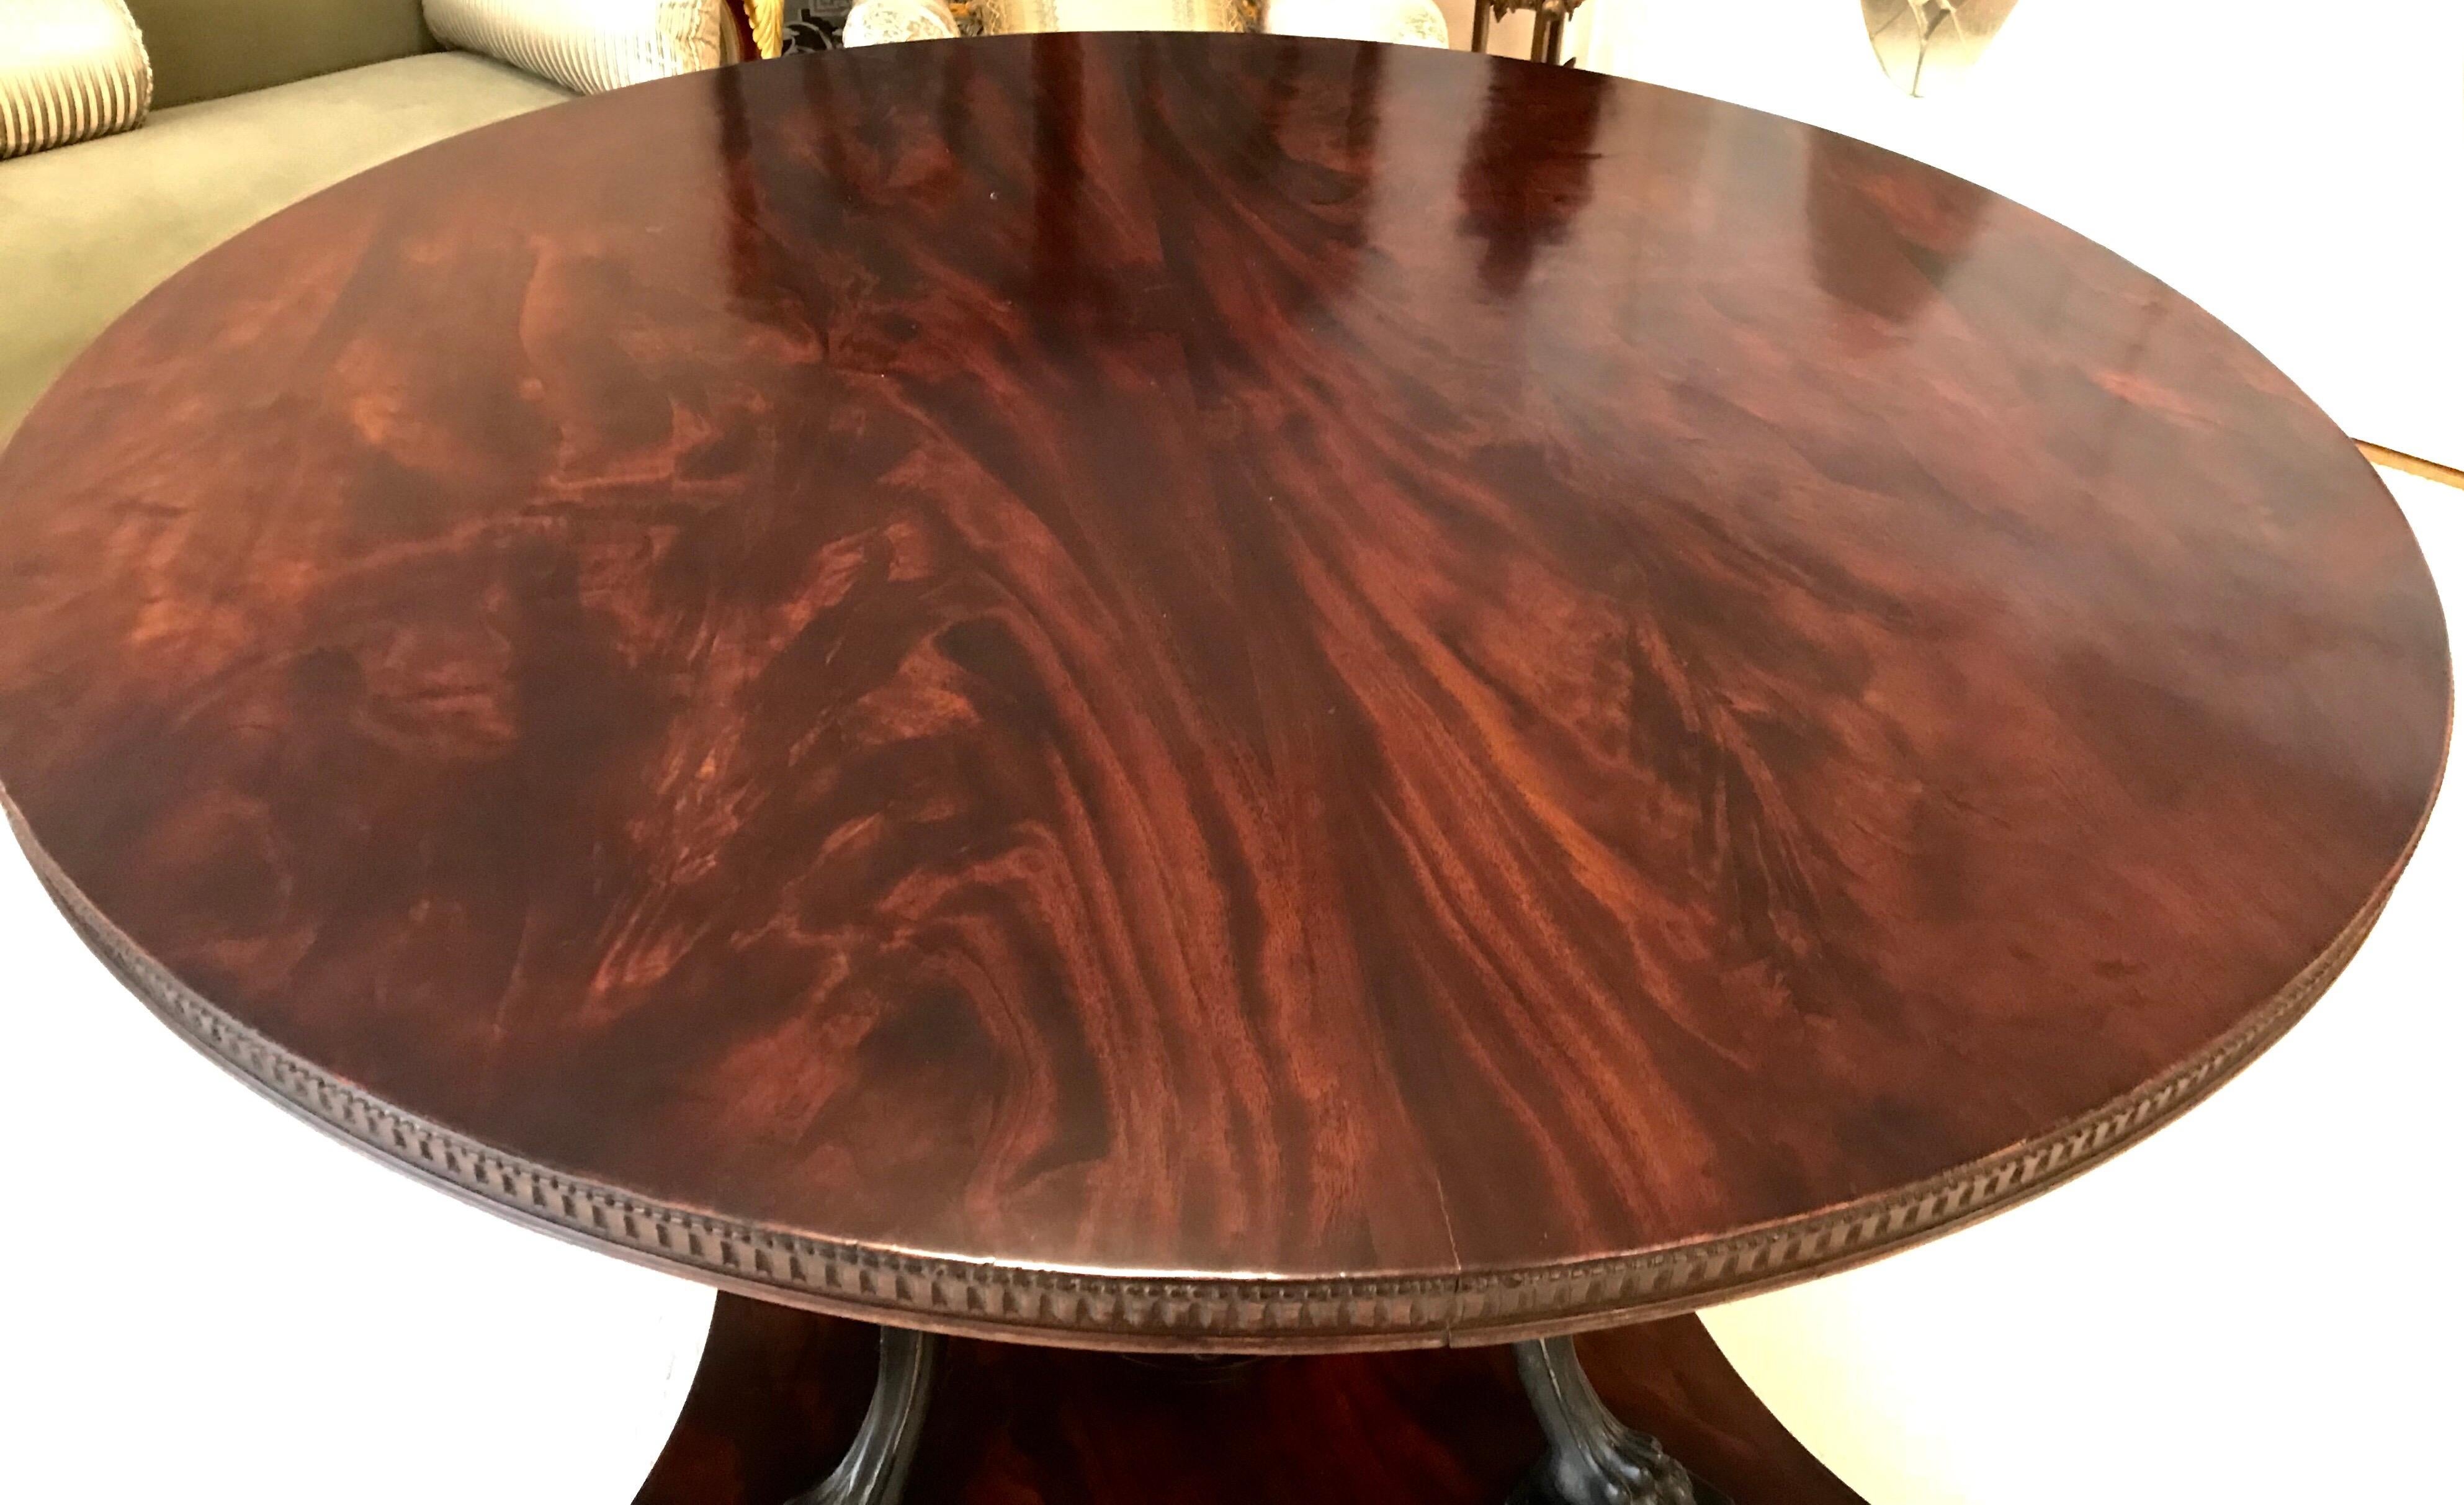 This stunning English neoclassical center table has a platform base with a central shaft and four hand carved ebonized winged Griffins holding the highly figured mahogany top. The carving is masterfully done and has some gilded highlights.